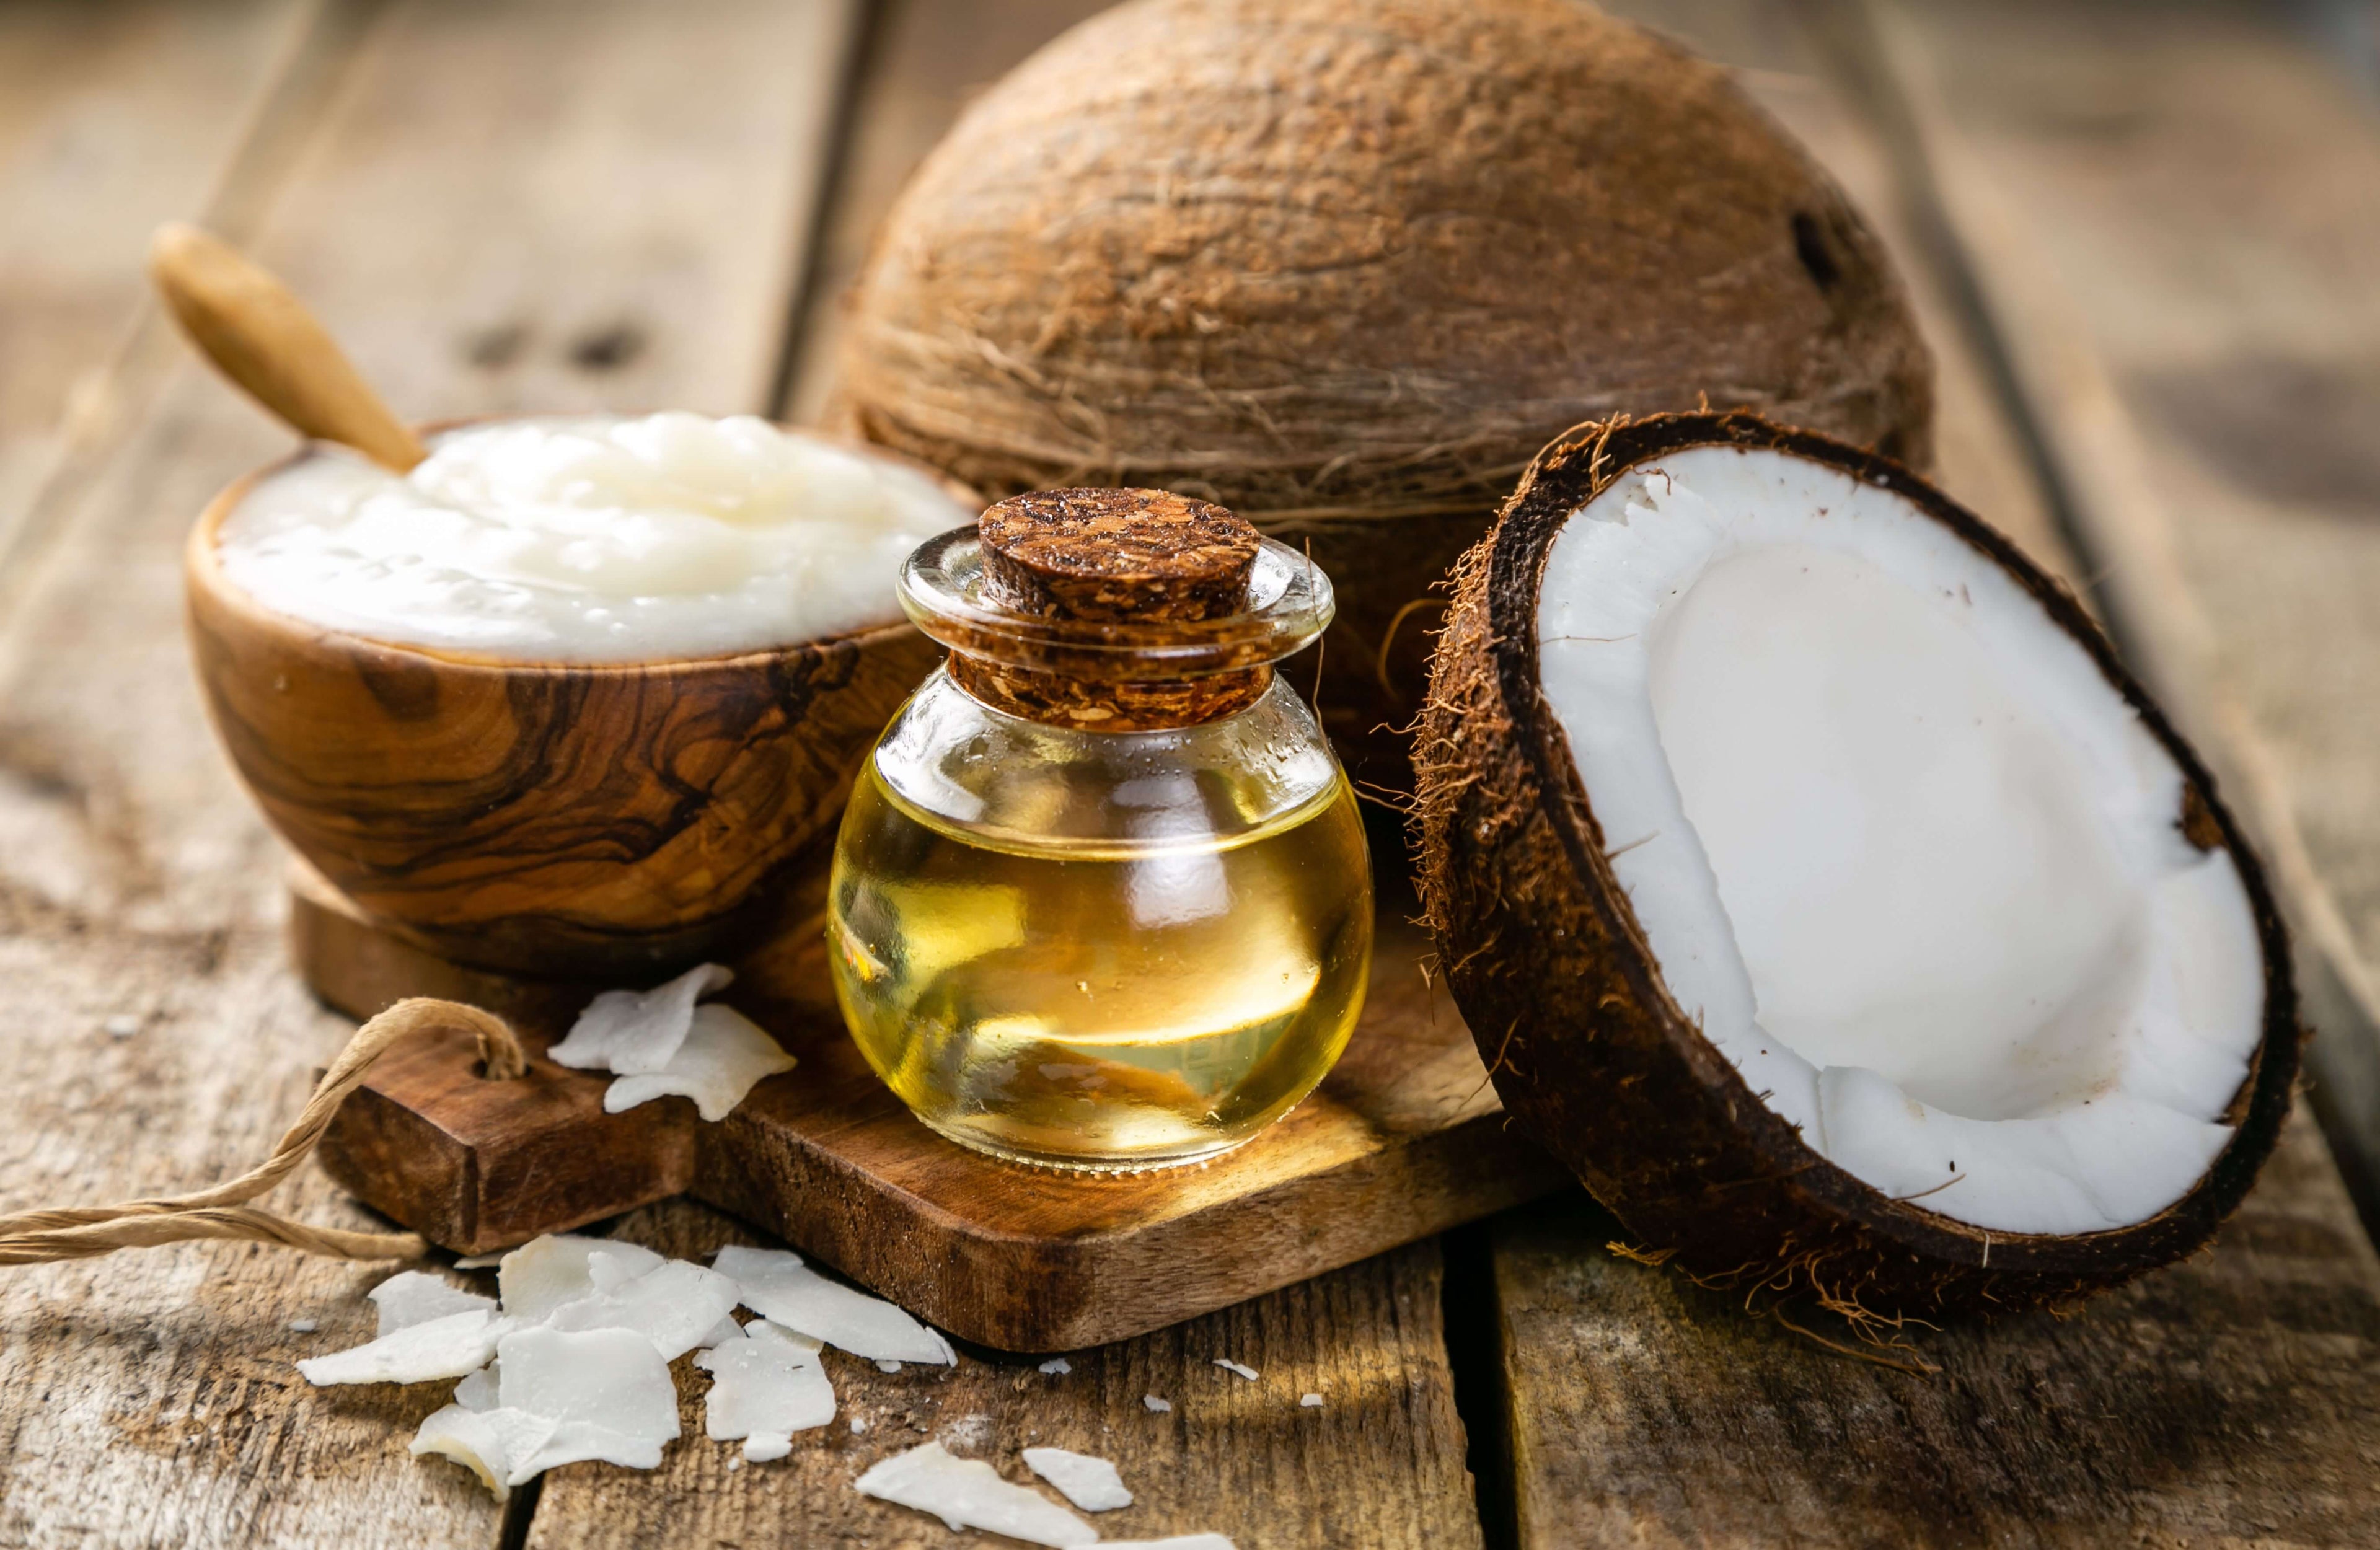 A traditional remedy for a healthier heart - Virgin Coconut Oil